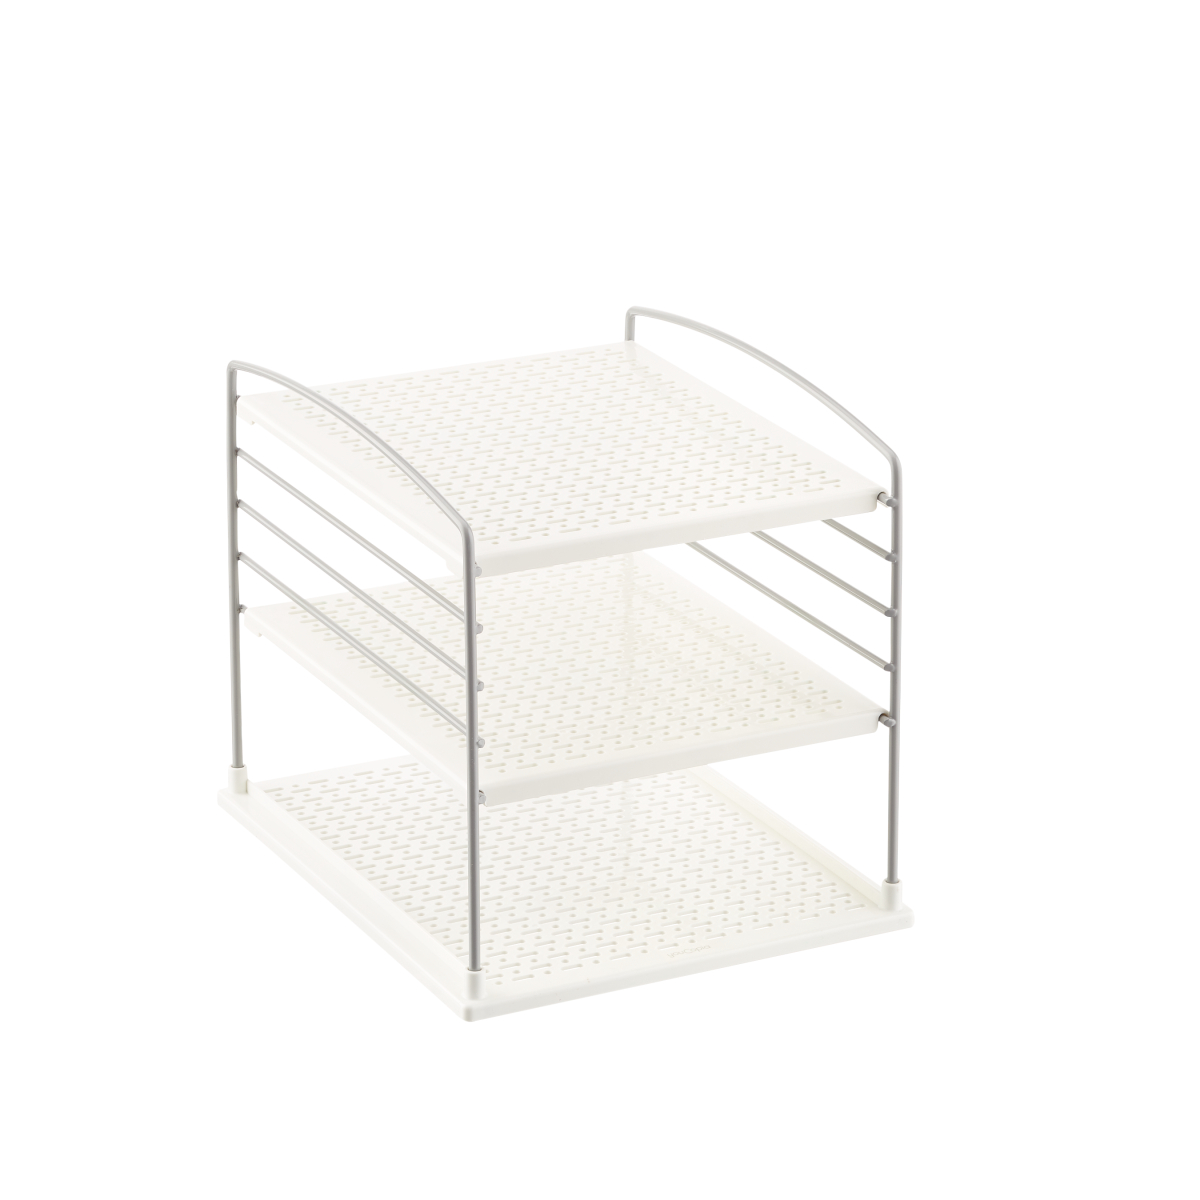 https://www.containerstore.com/catalogimages/476993/10082761-youCopia-UpSpace-box-organi.jpg